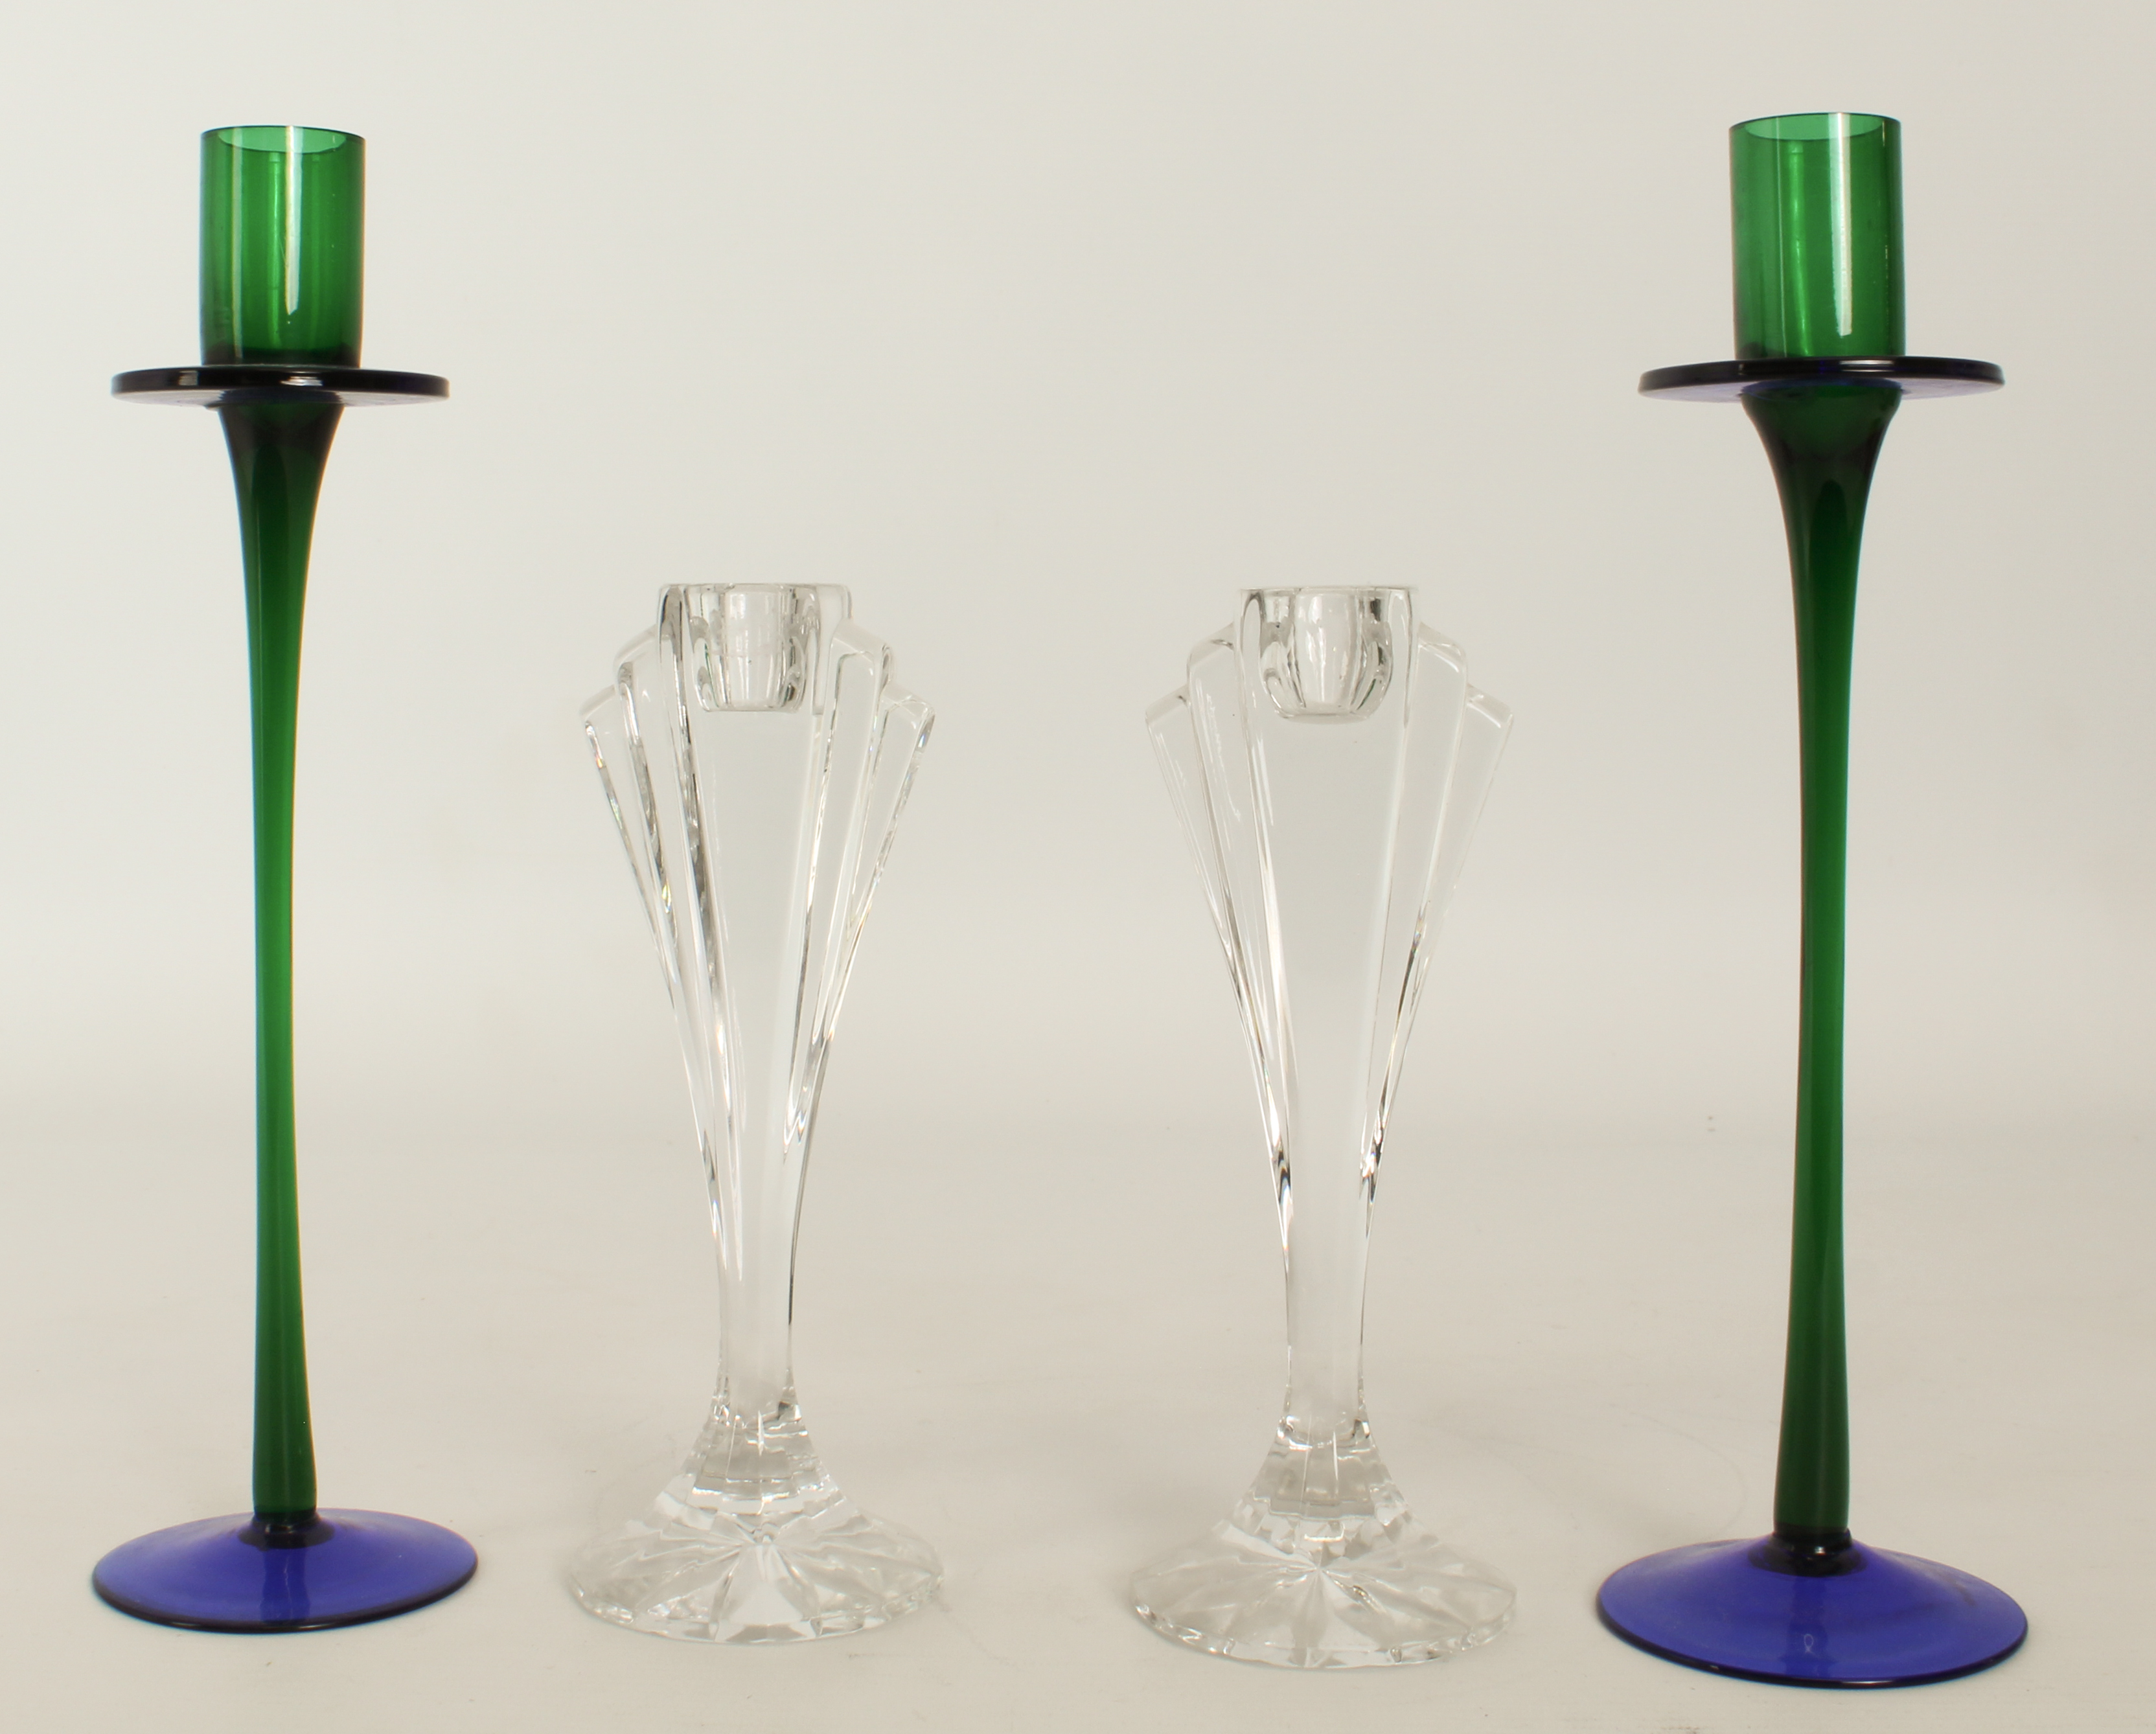 A pair of retro green and blue art glass candlesticks - 1980s, blown glass, with cylindrical nozzles - Image 2 of 4